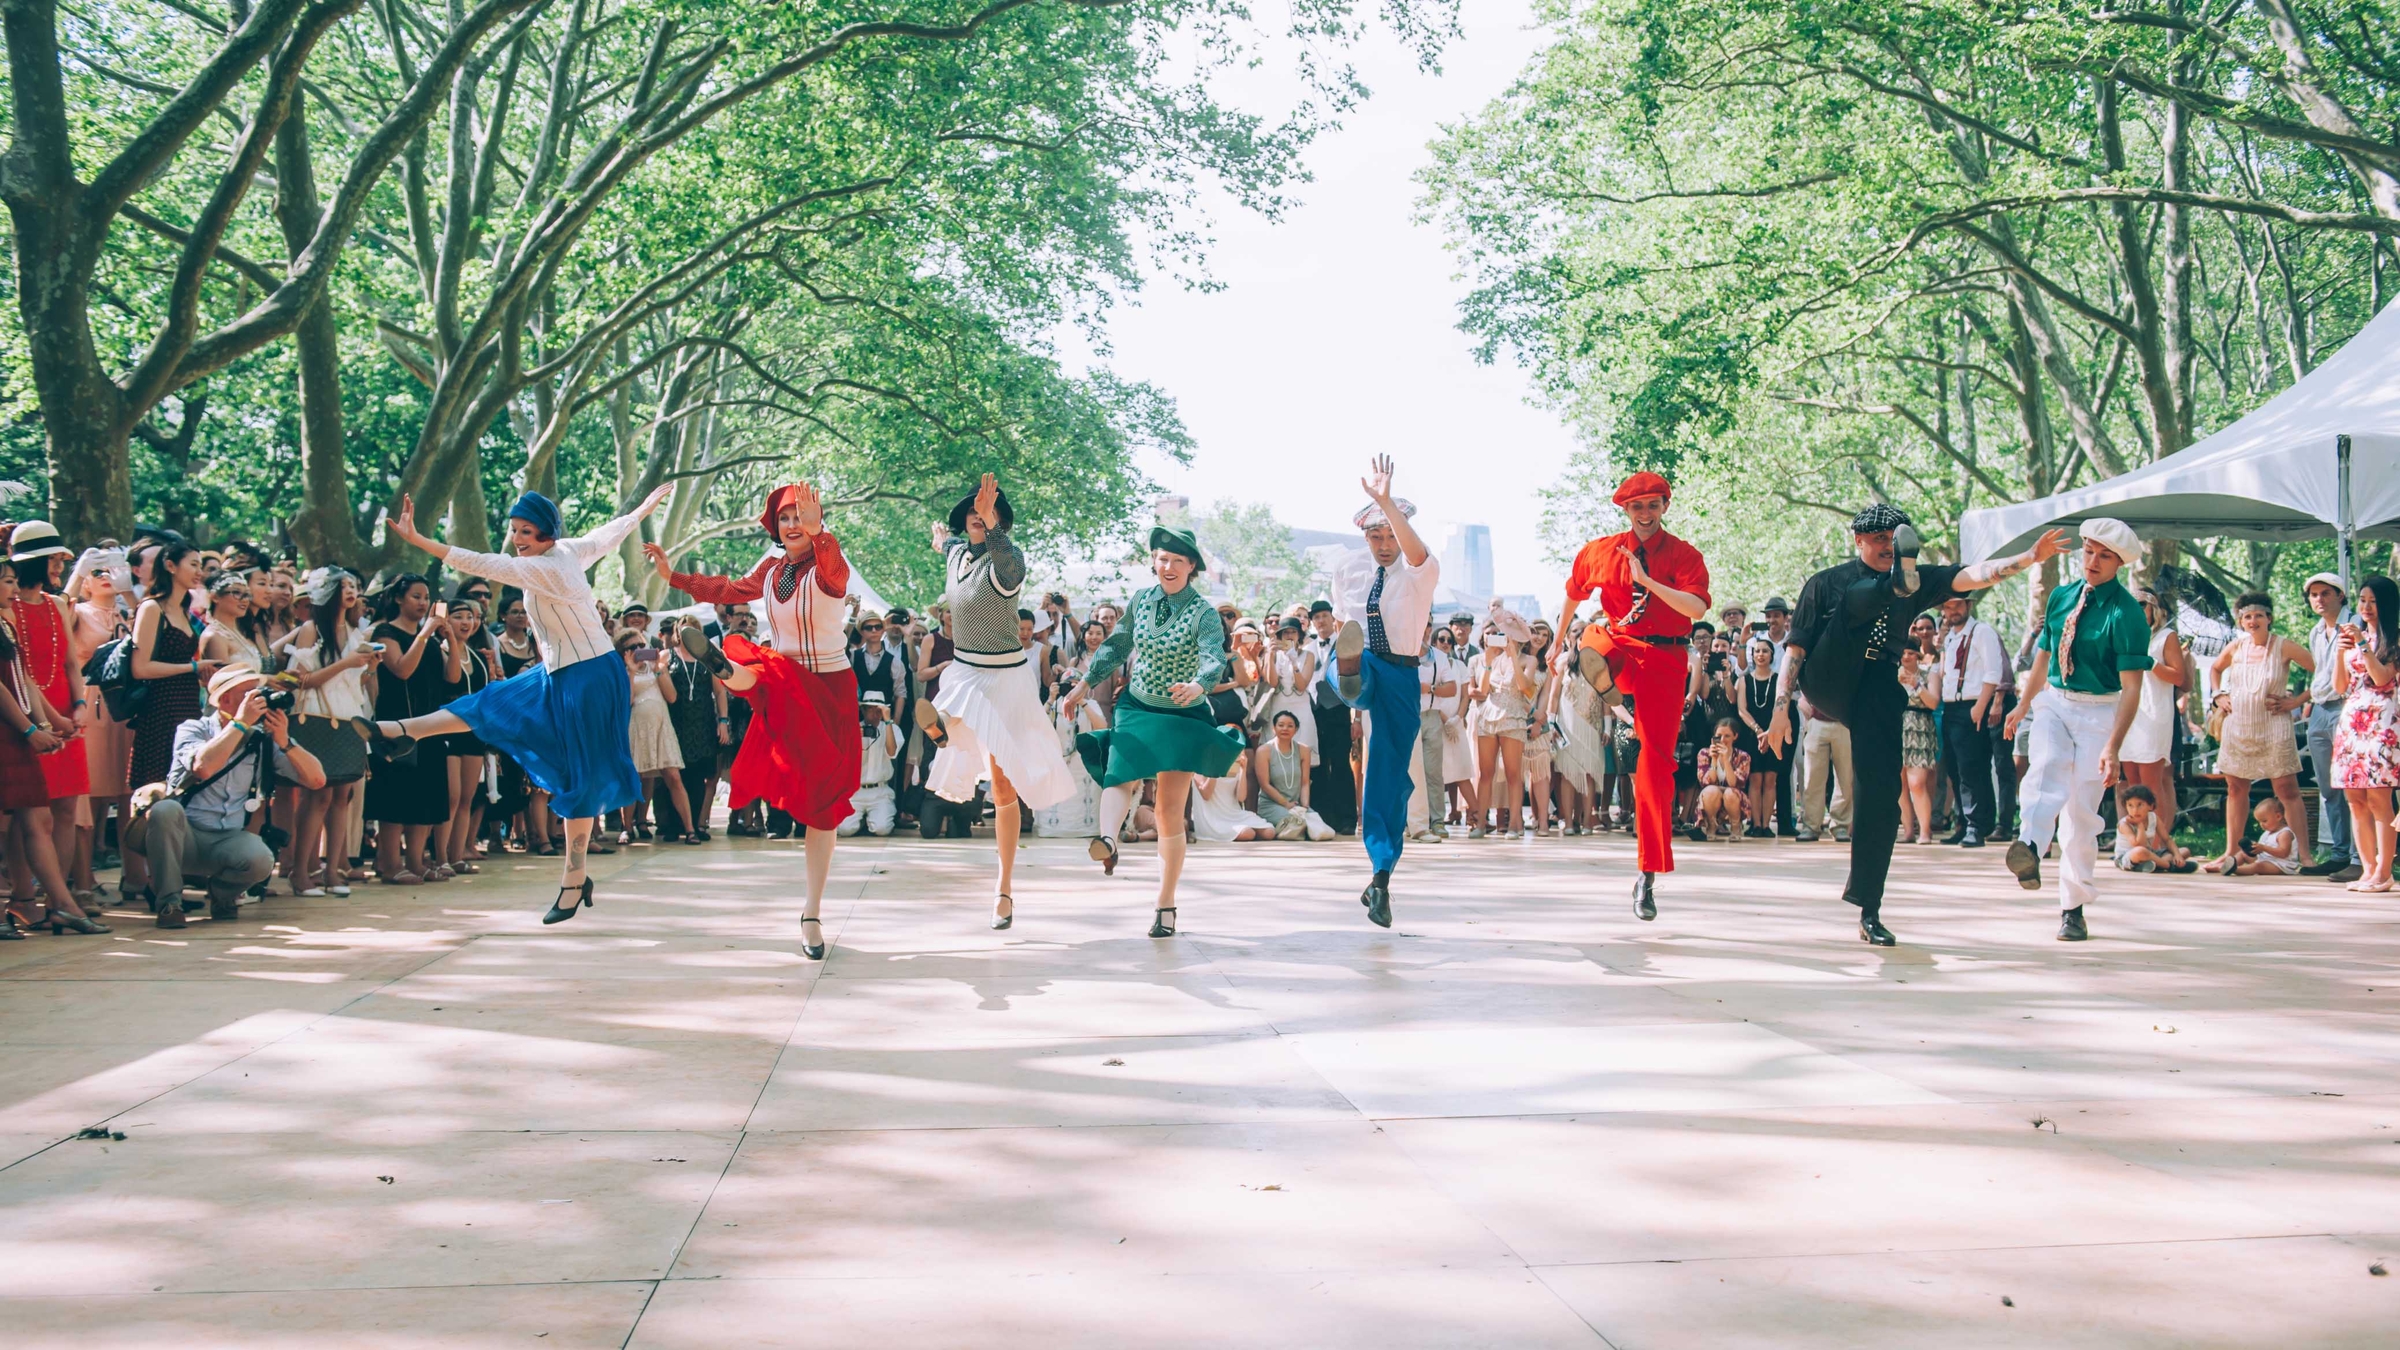 THE 15TH ANNUAL JAZZ AGE LAWN PARTY  RETURNS TO GOVERNORS ISLAND